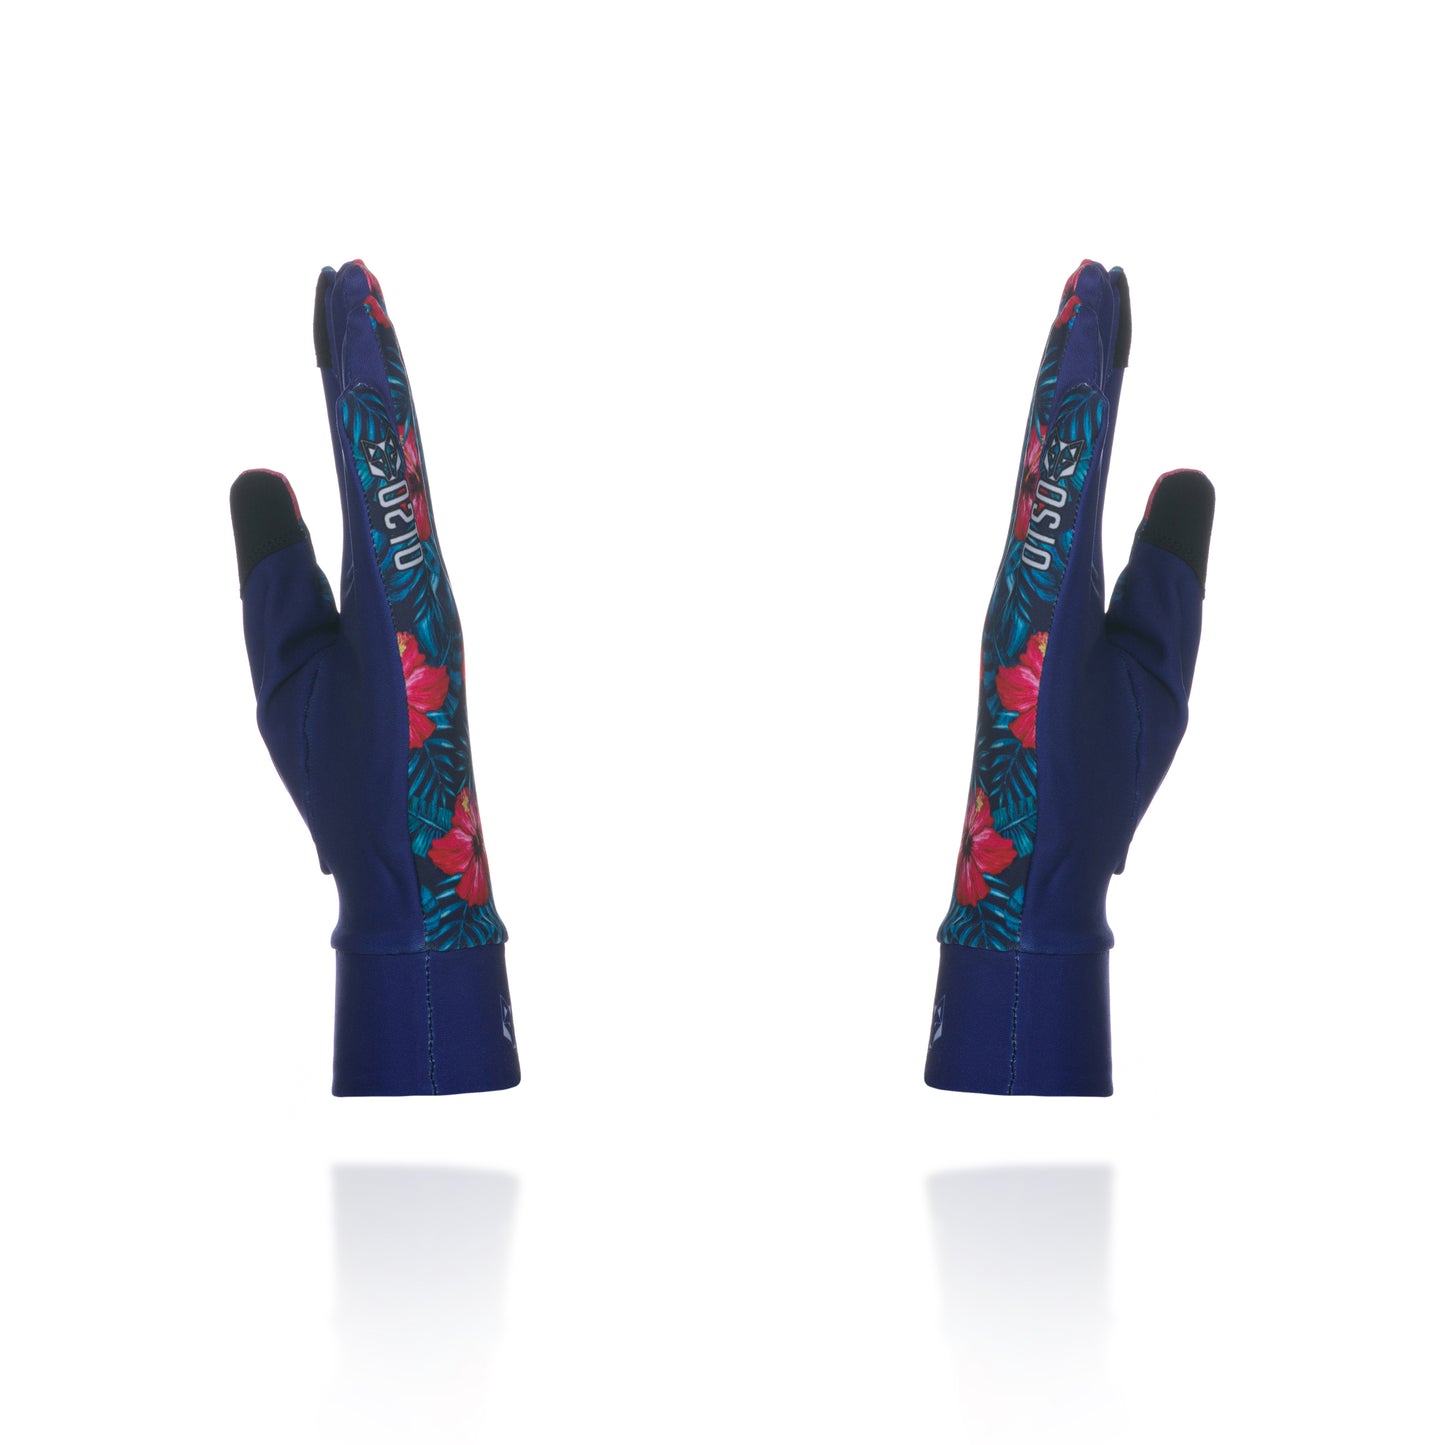 Tropical Gloves